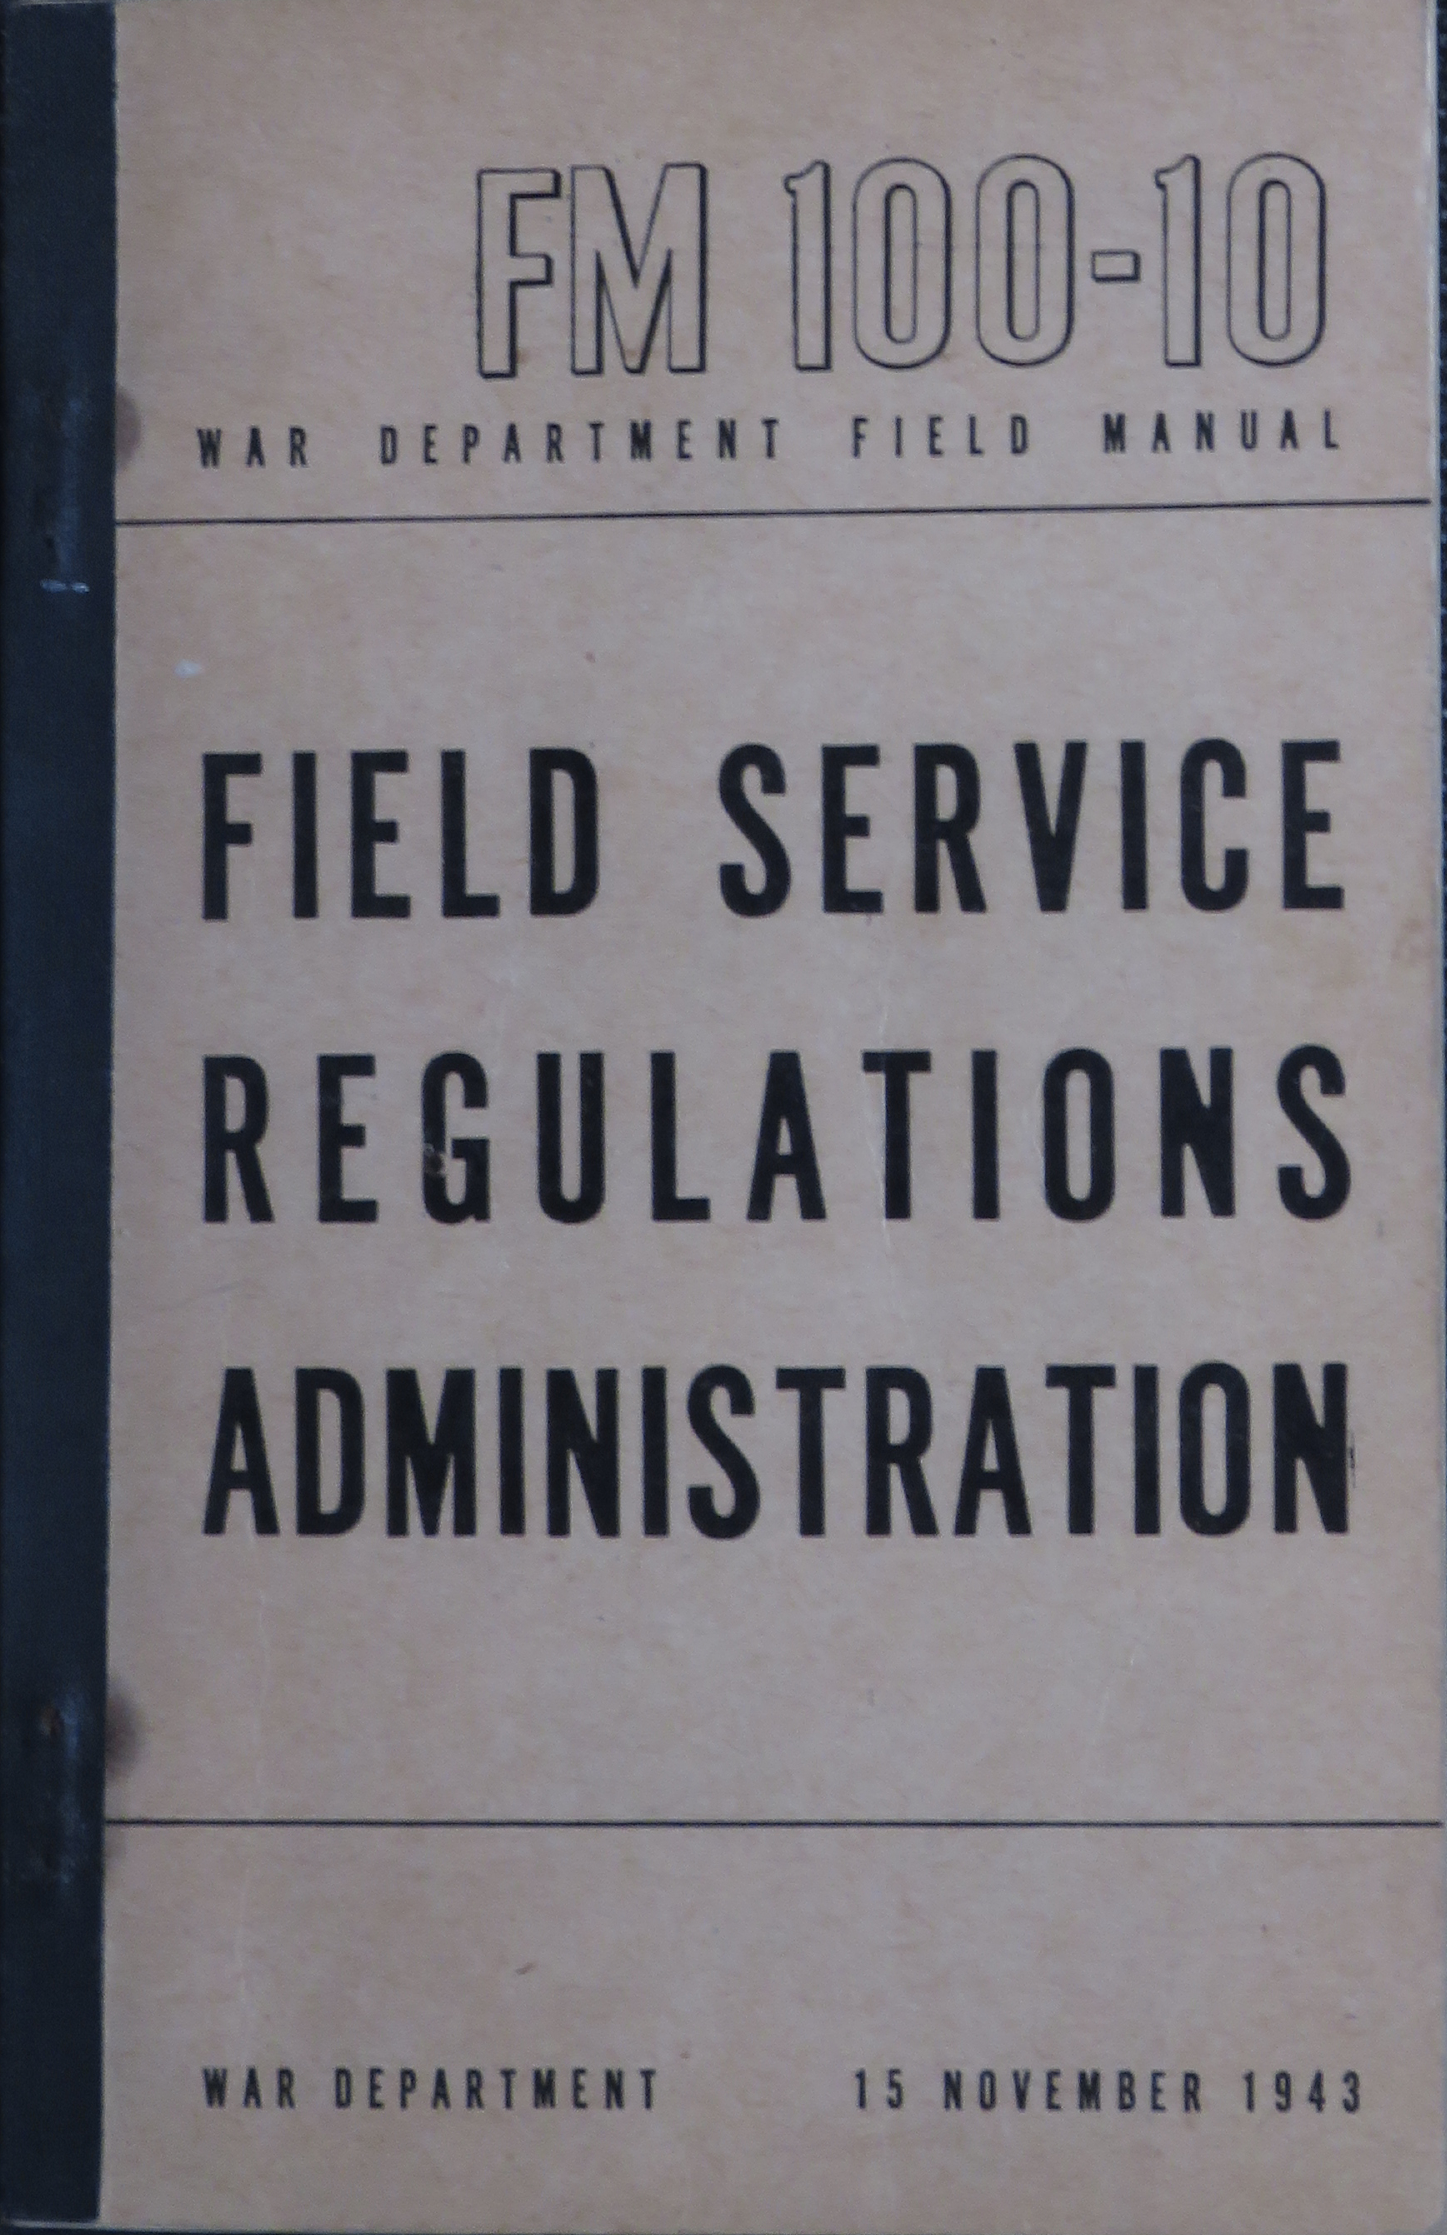 Sample page 1 from AirCorps Library document: Field Service Regulations for Administration